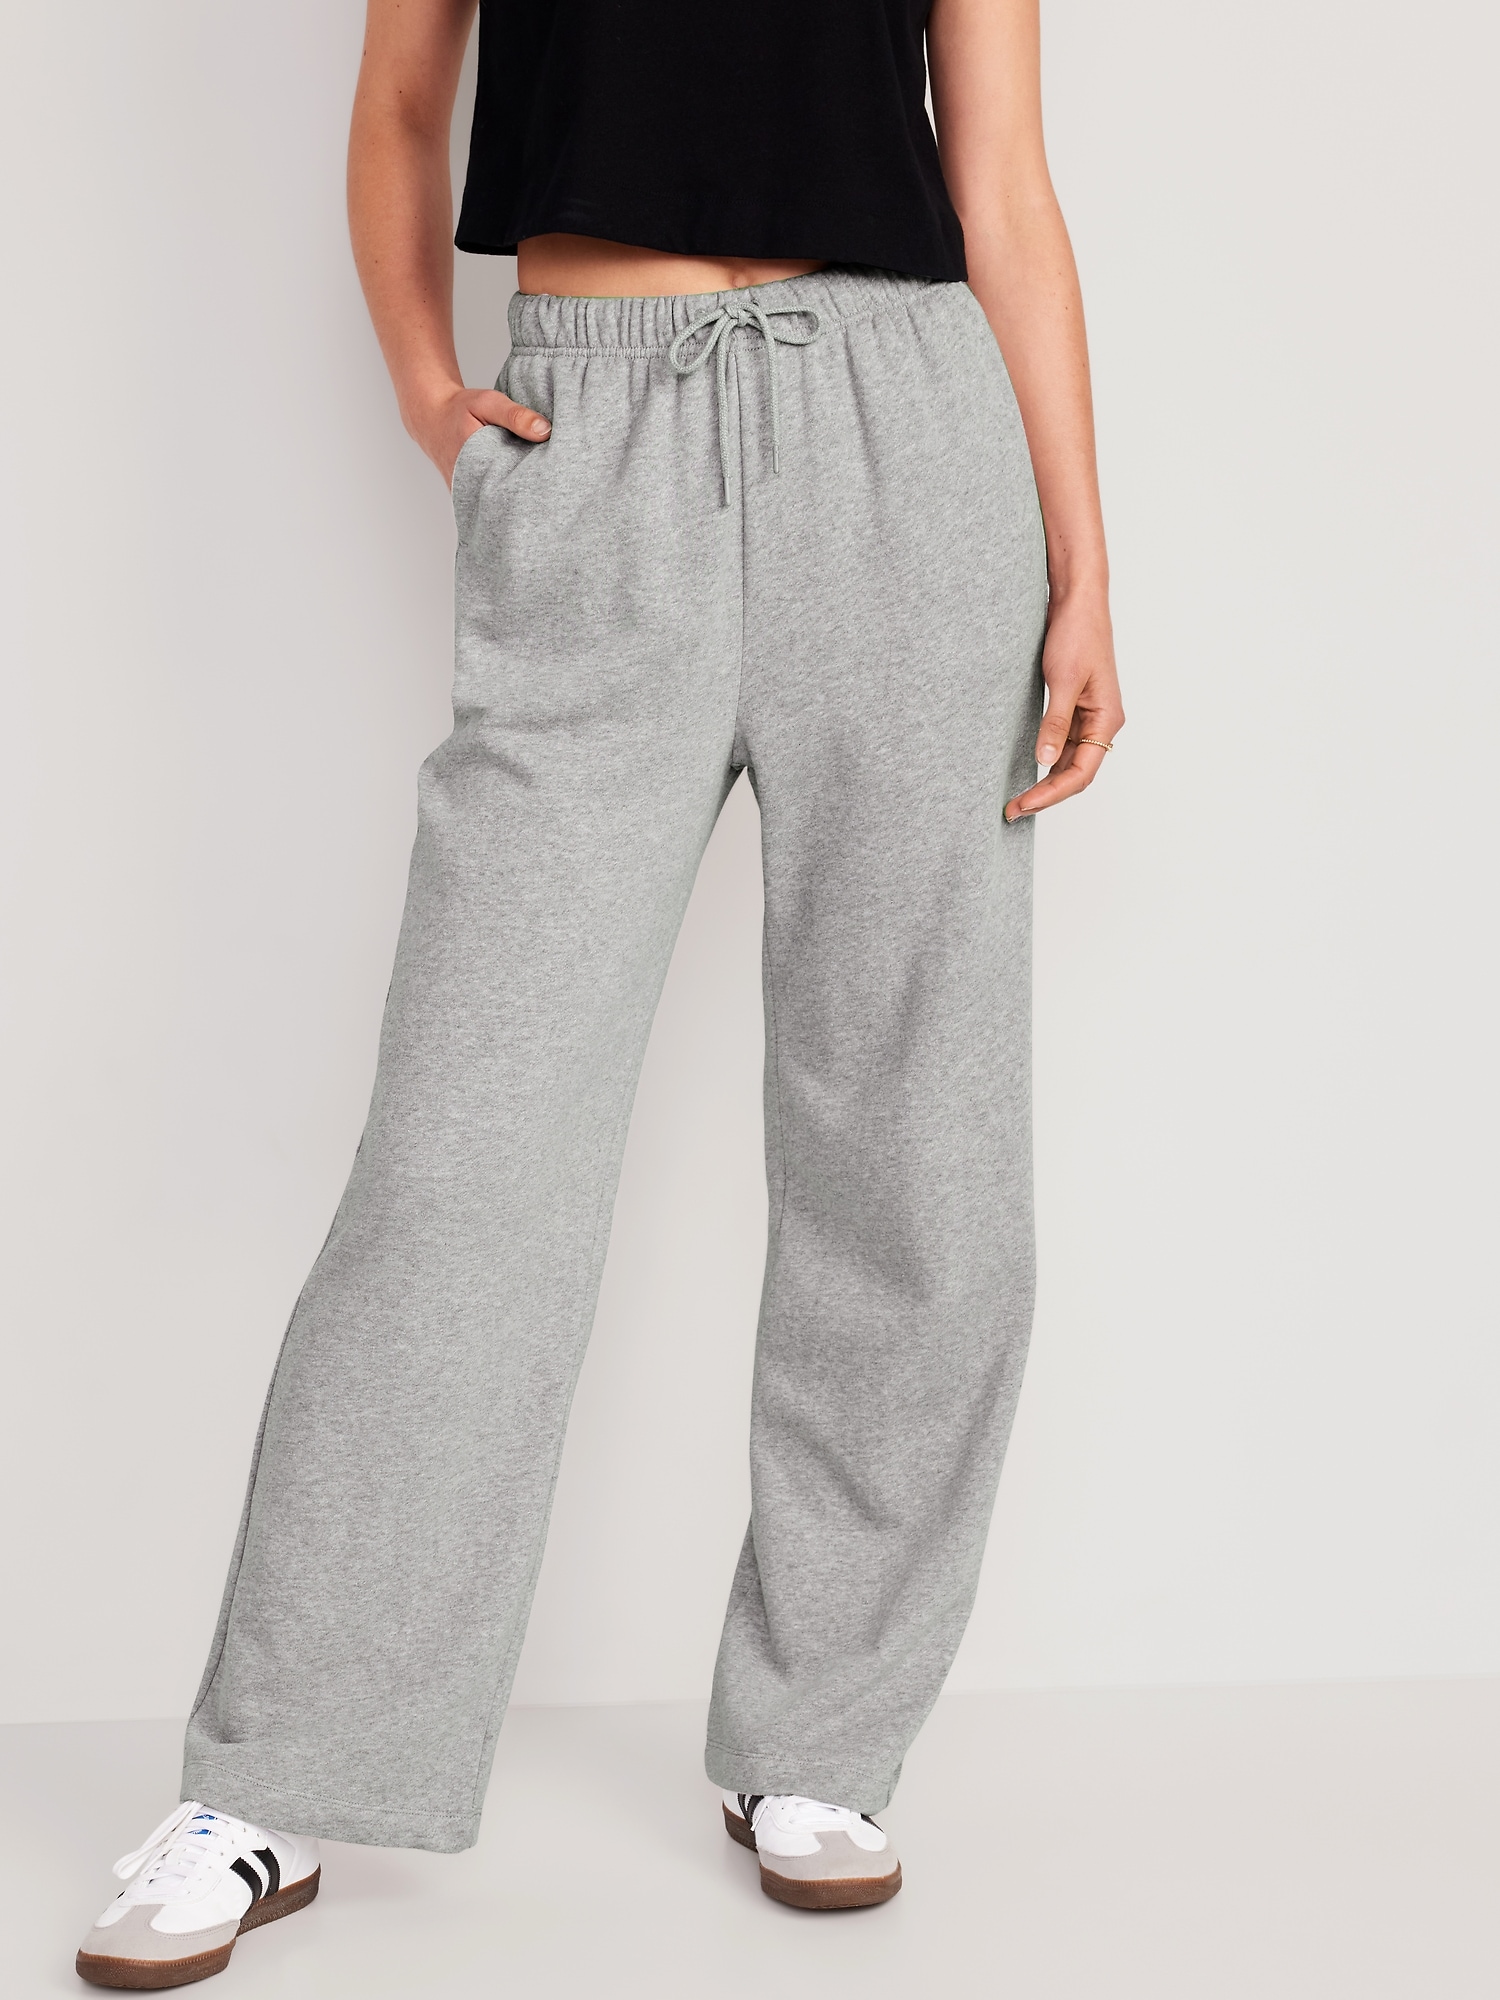 Lounge Pants for Tall Women